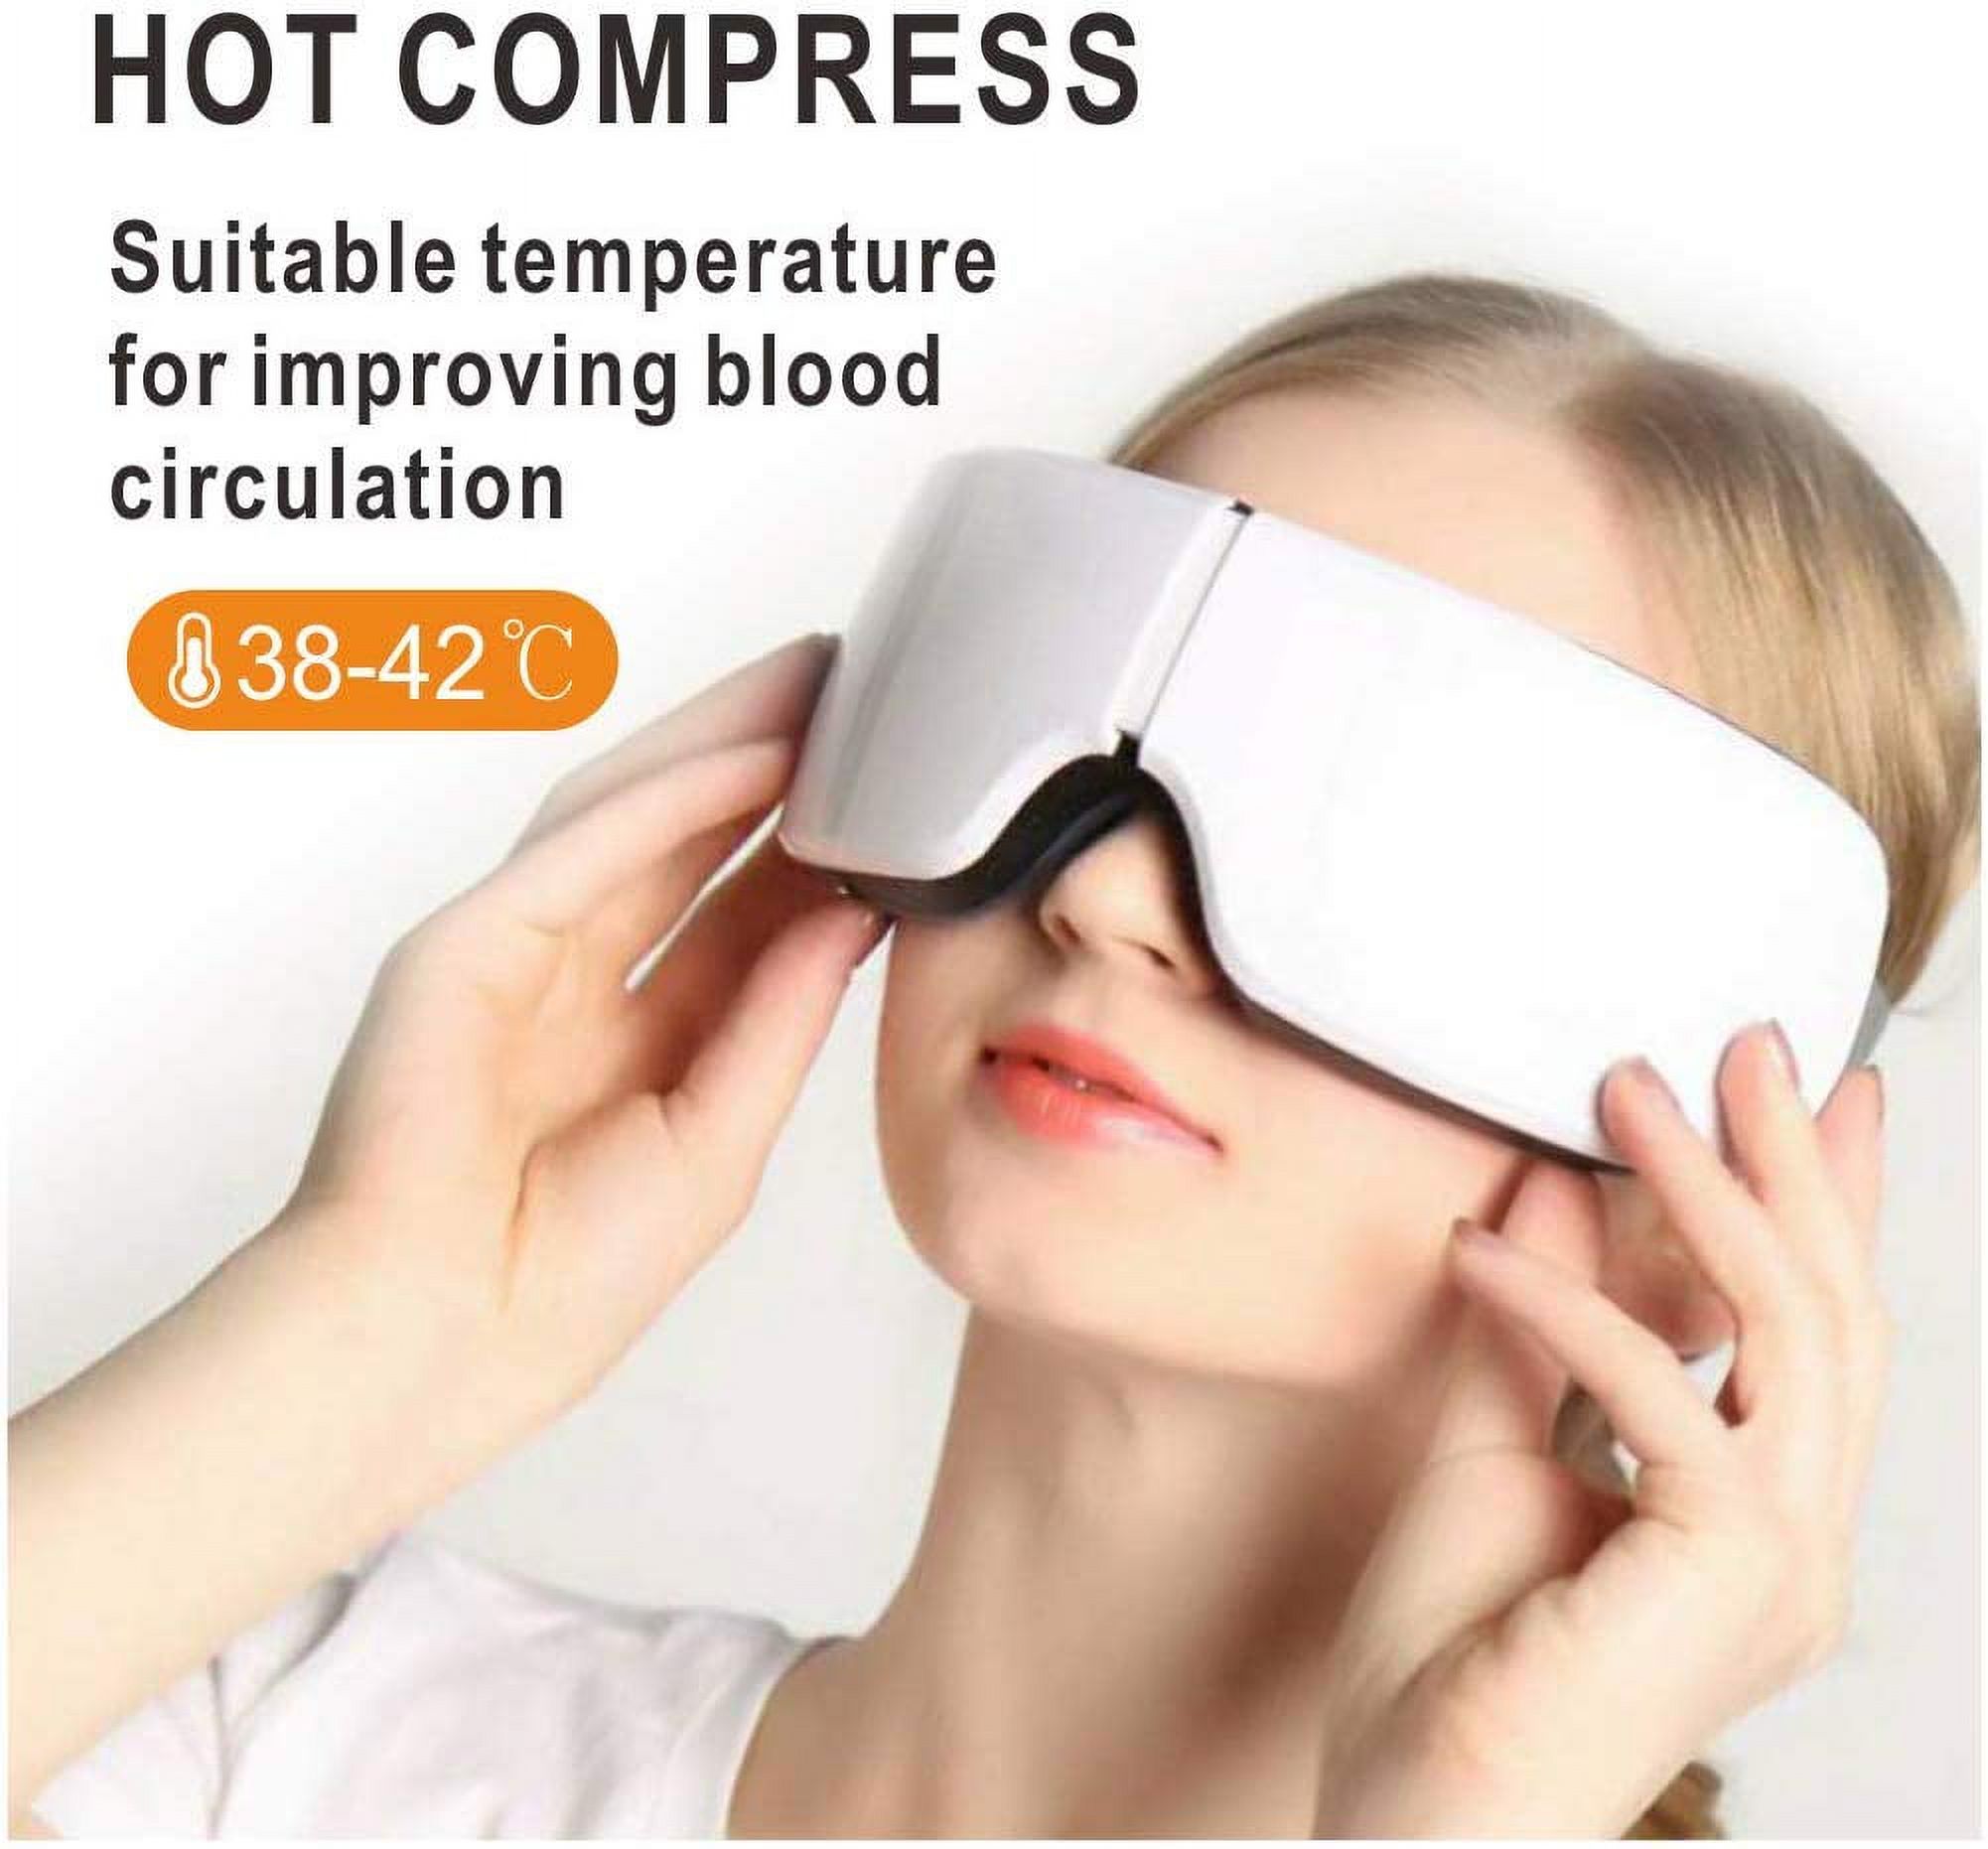 "Happyline" Electric Eye Massager with Heat, Air Compression, Bluetooth Music, Wireless Eye and Temple Massager for Relieving Dry Eyes, Eye Fatigue, Improving Blood Circulation and Sleep Quality - image 4 of 7